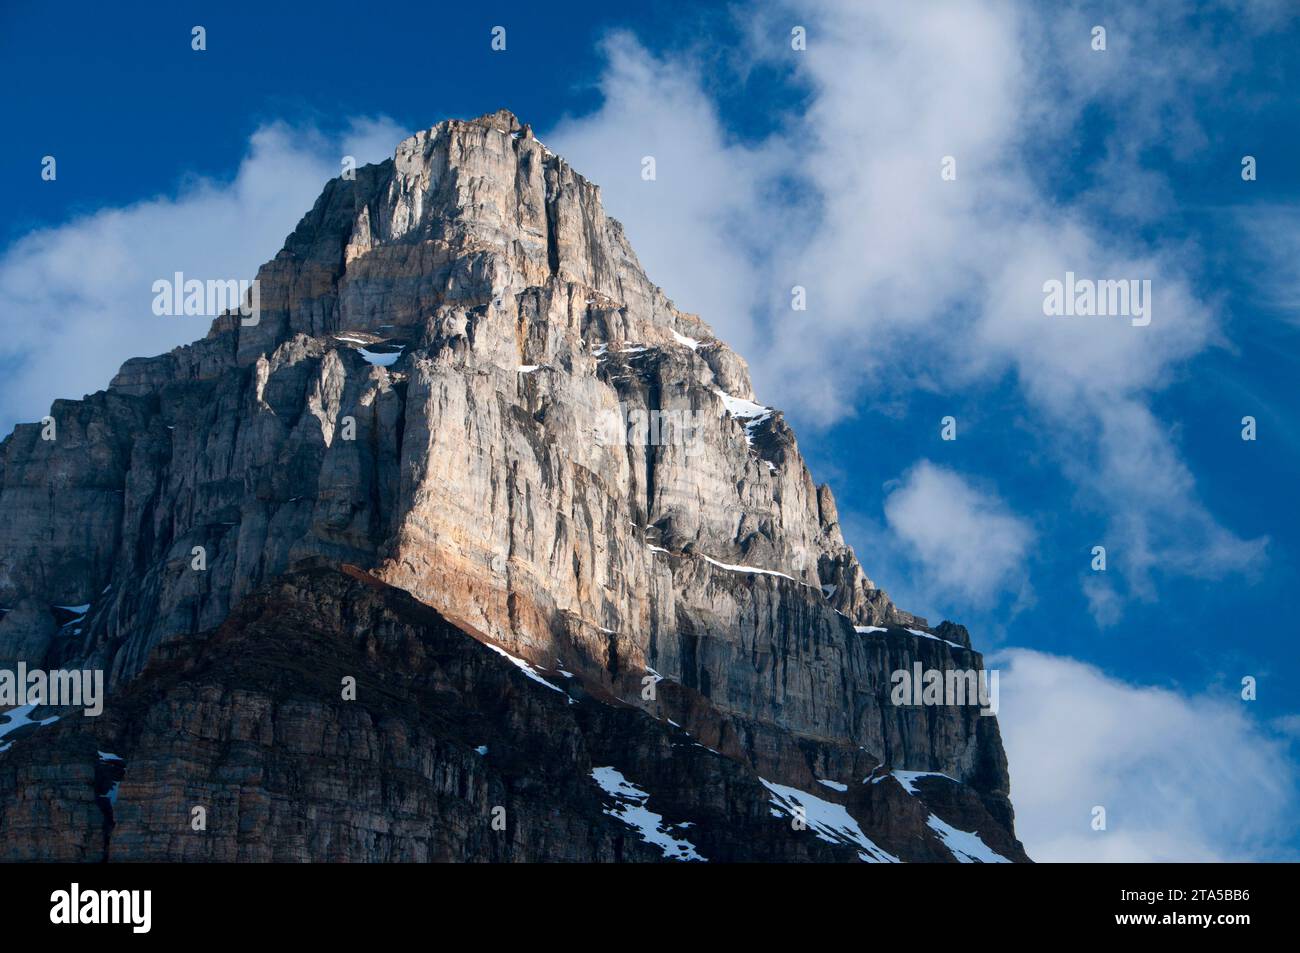 Pinnacle Mountain from Larch Valley, Banff National Park, Alberta, Canada Stock Photo